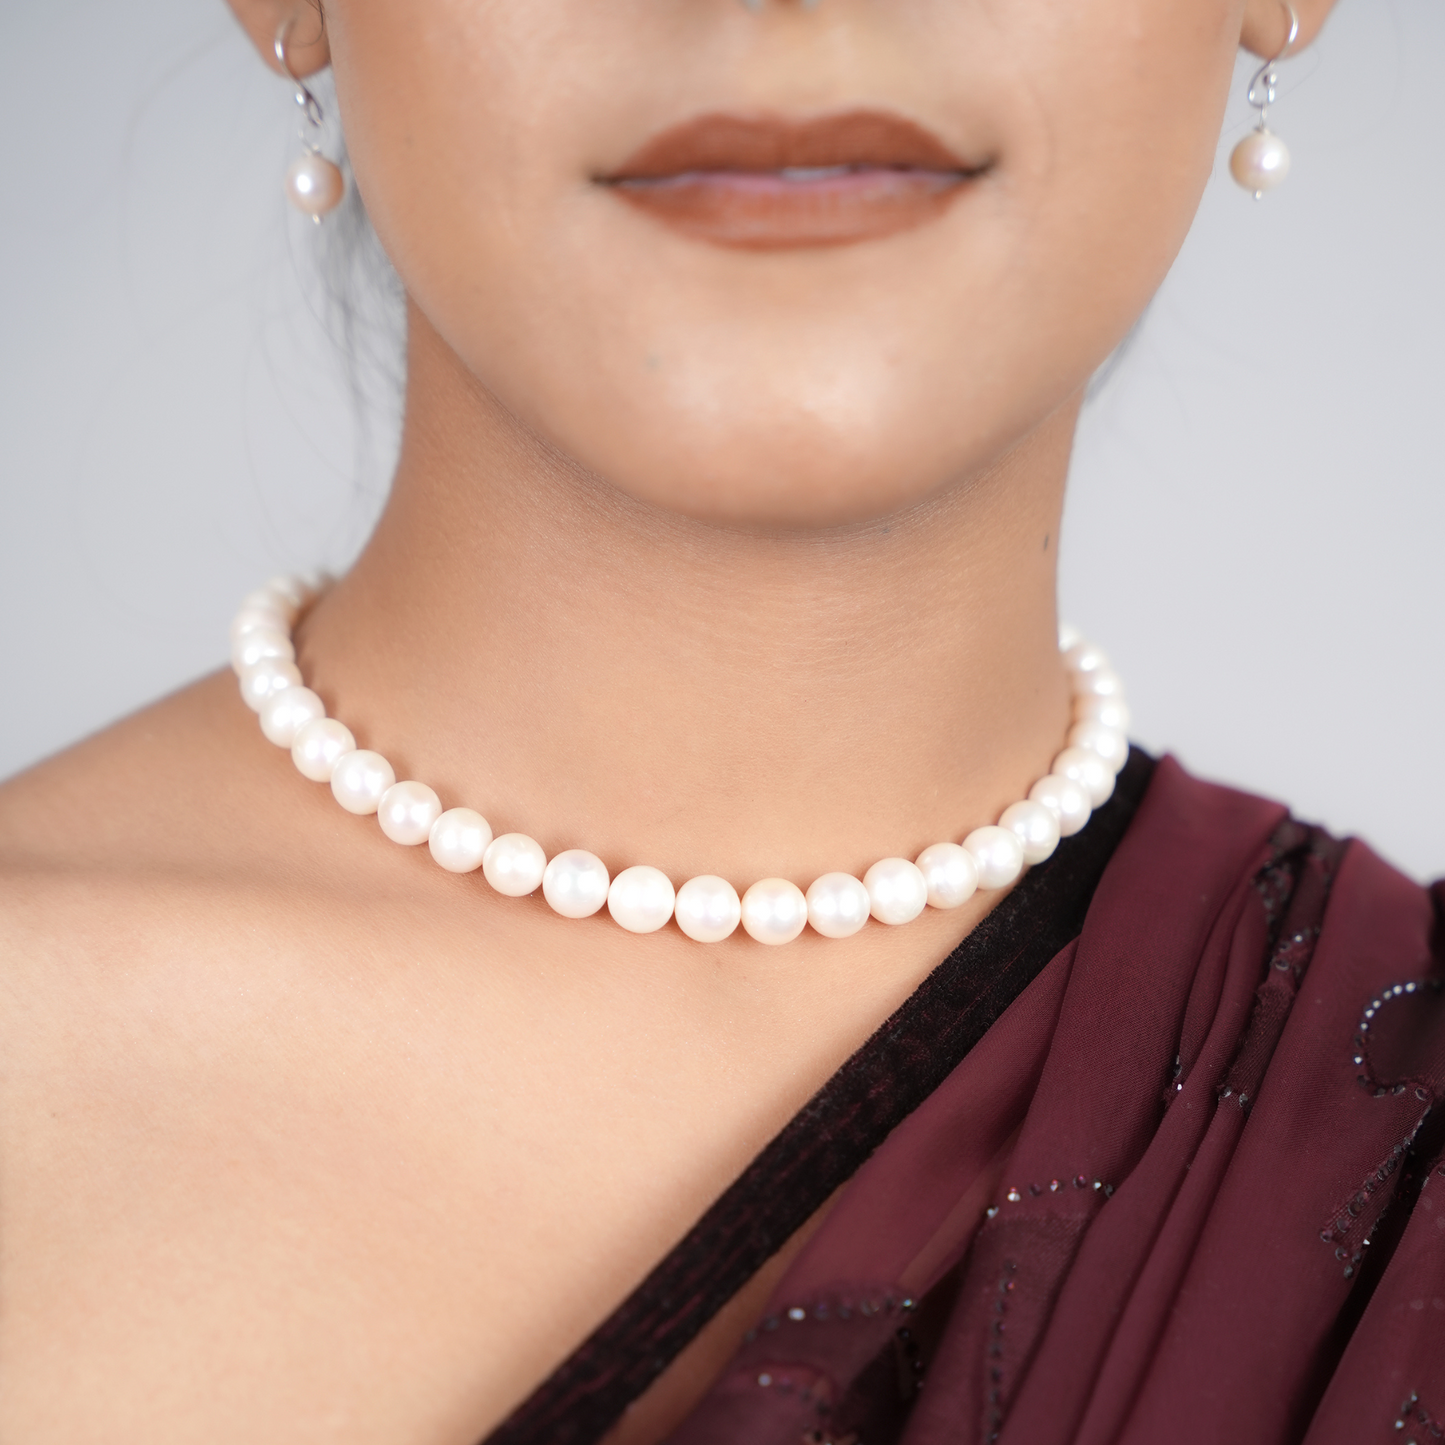 "Eleganza" 10mm Cultured Pearl Necklace and Earrings Set for Women in Silver